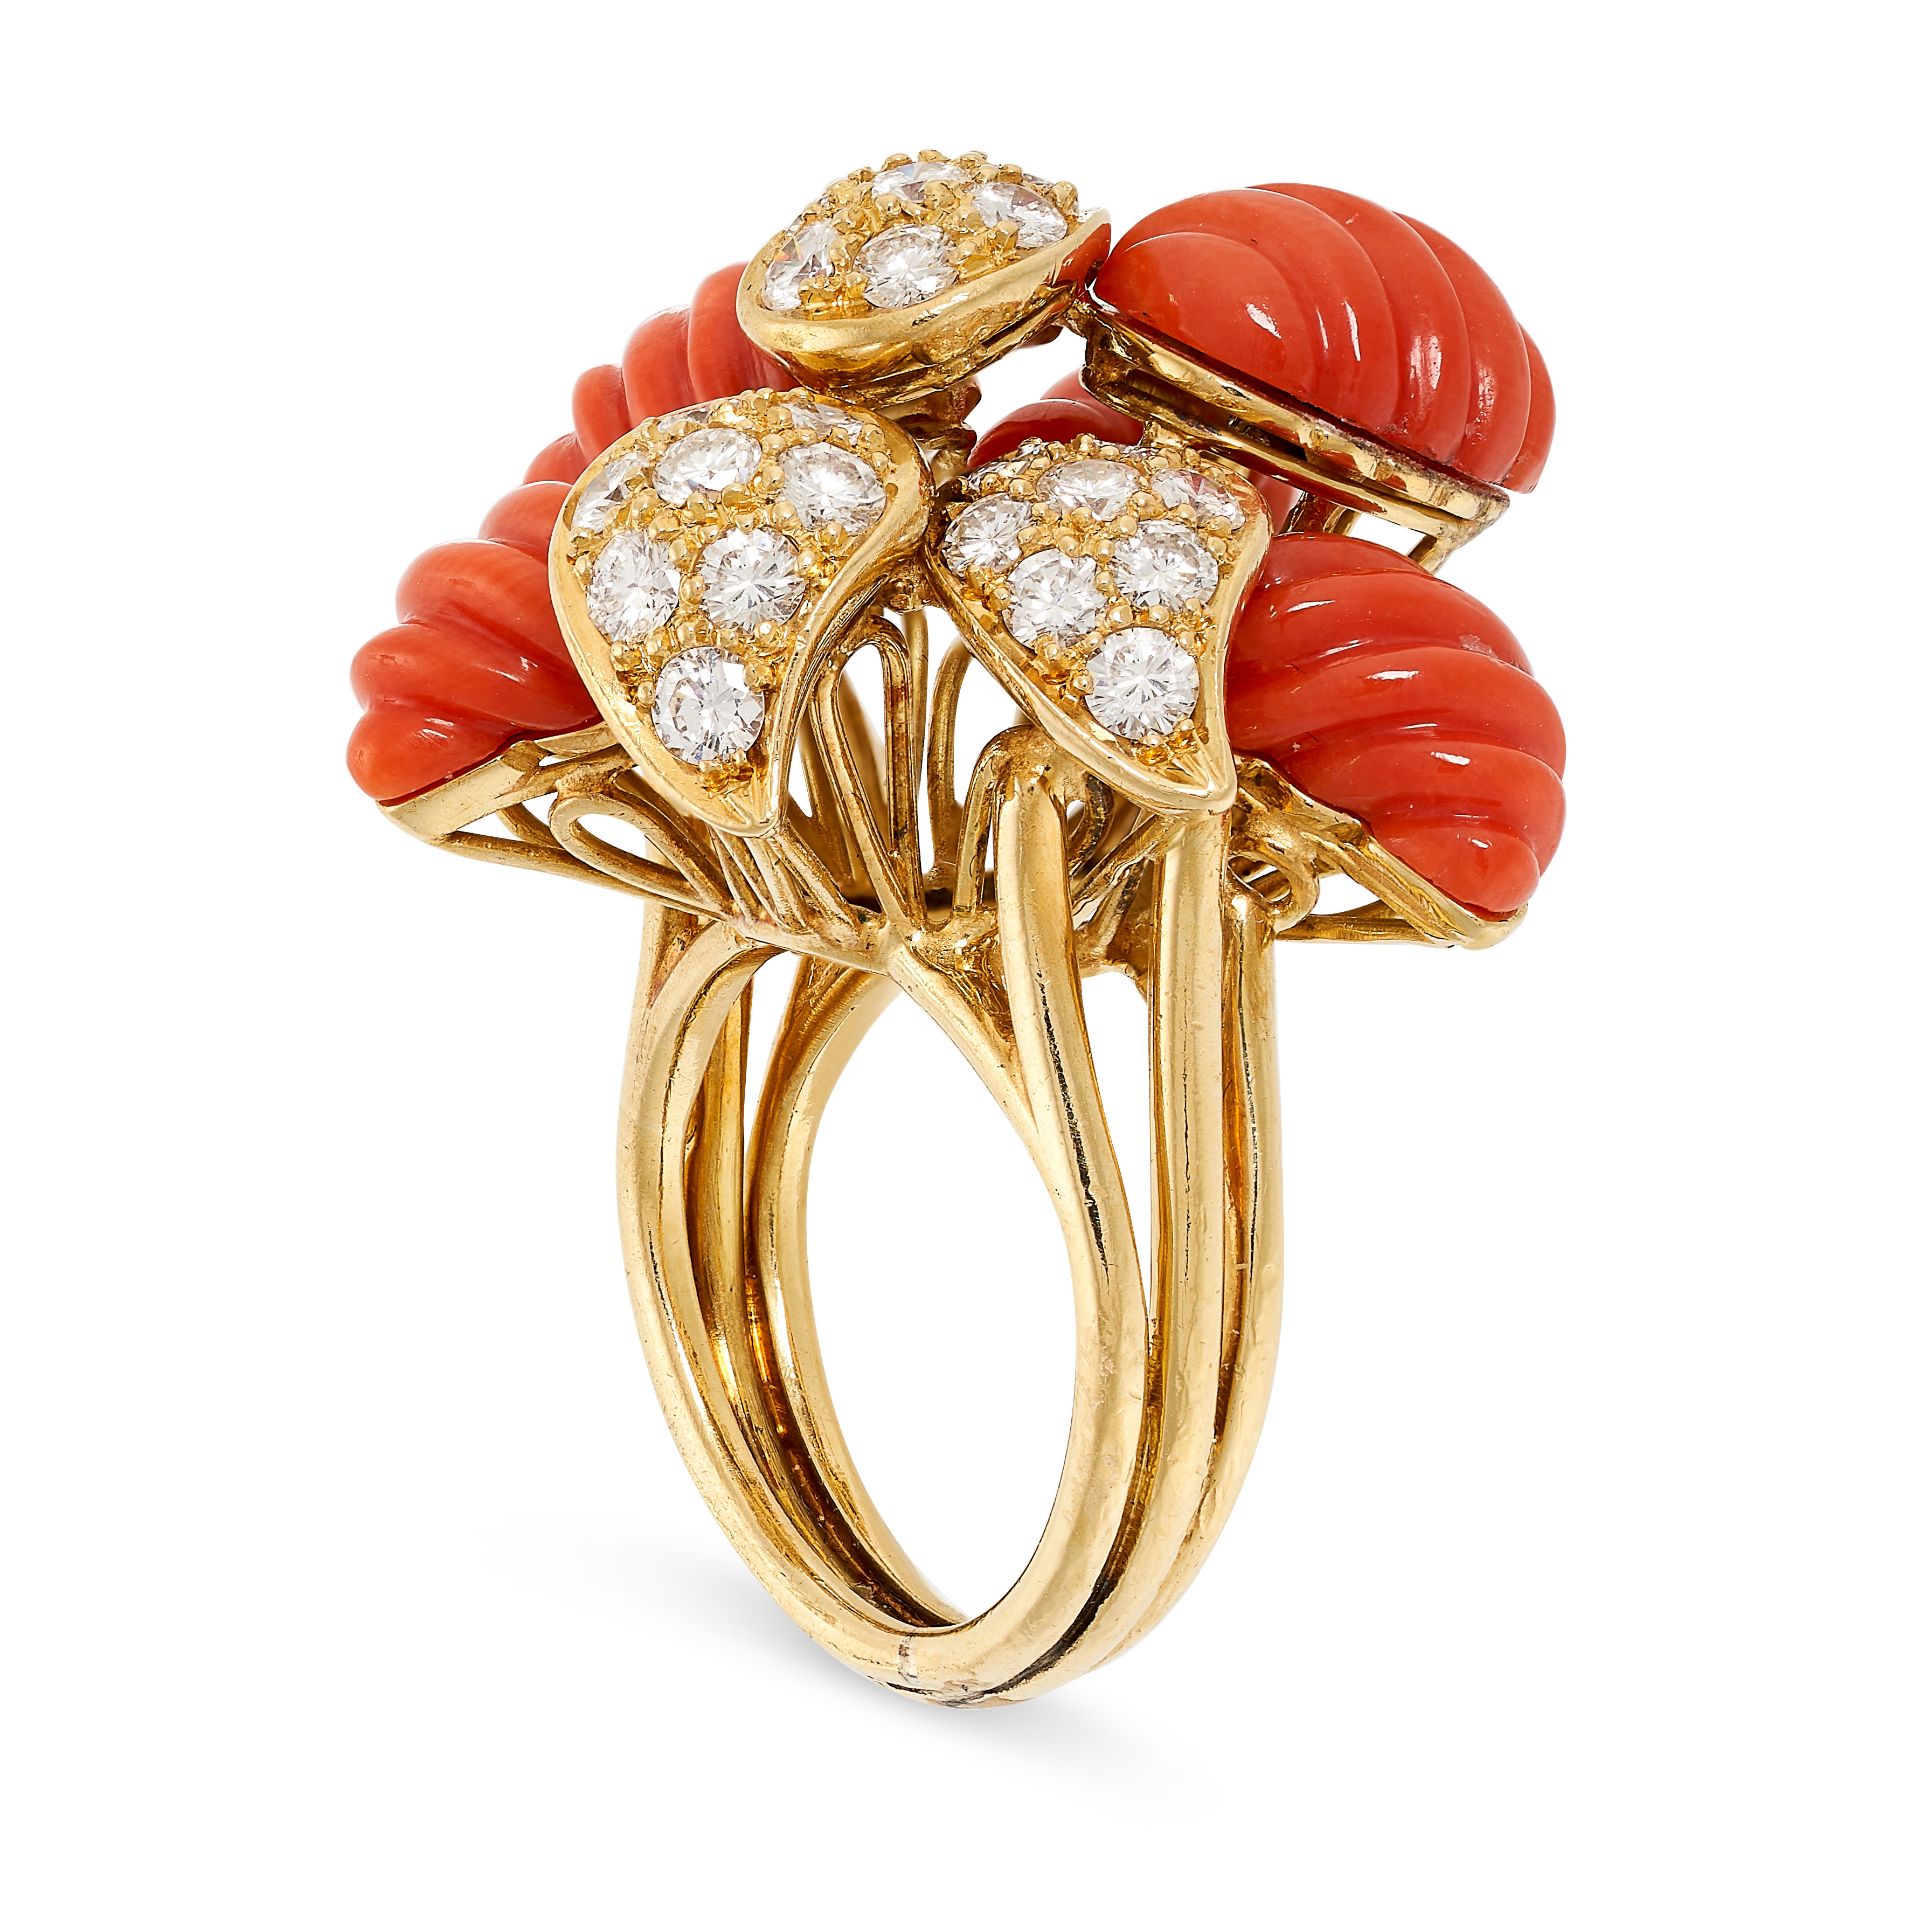 A VINTAGE CORAL AND DIAMOND COCKTAIL RING, CIRCA 1960 in yellow gold, set with a series of carved - Image 2 of 2